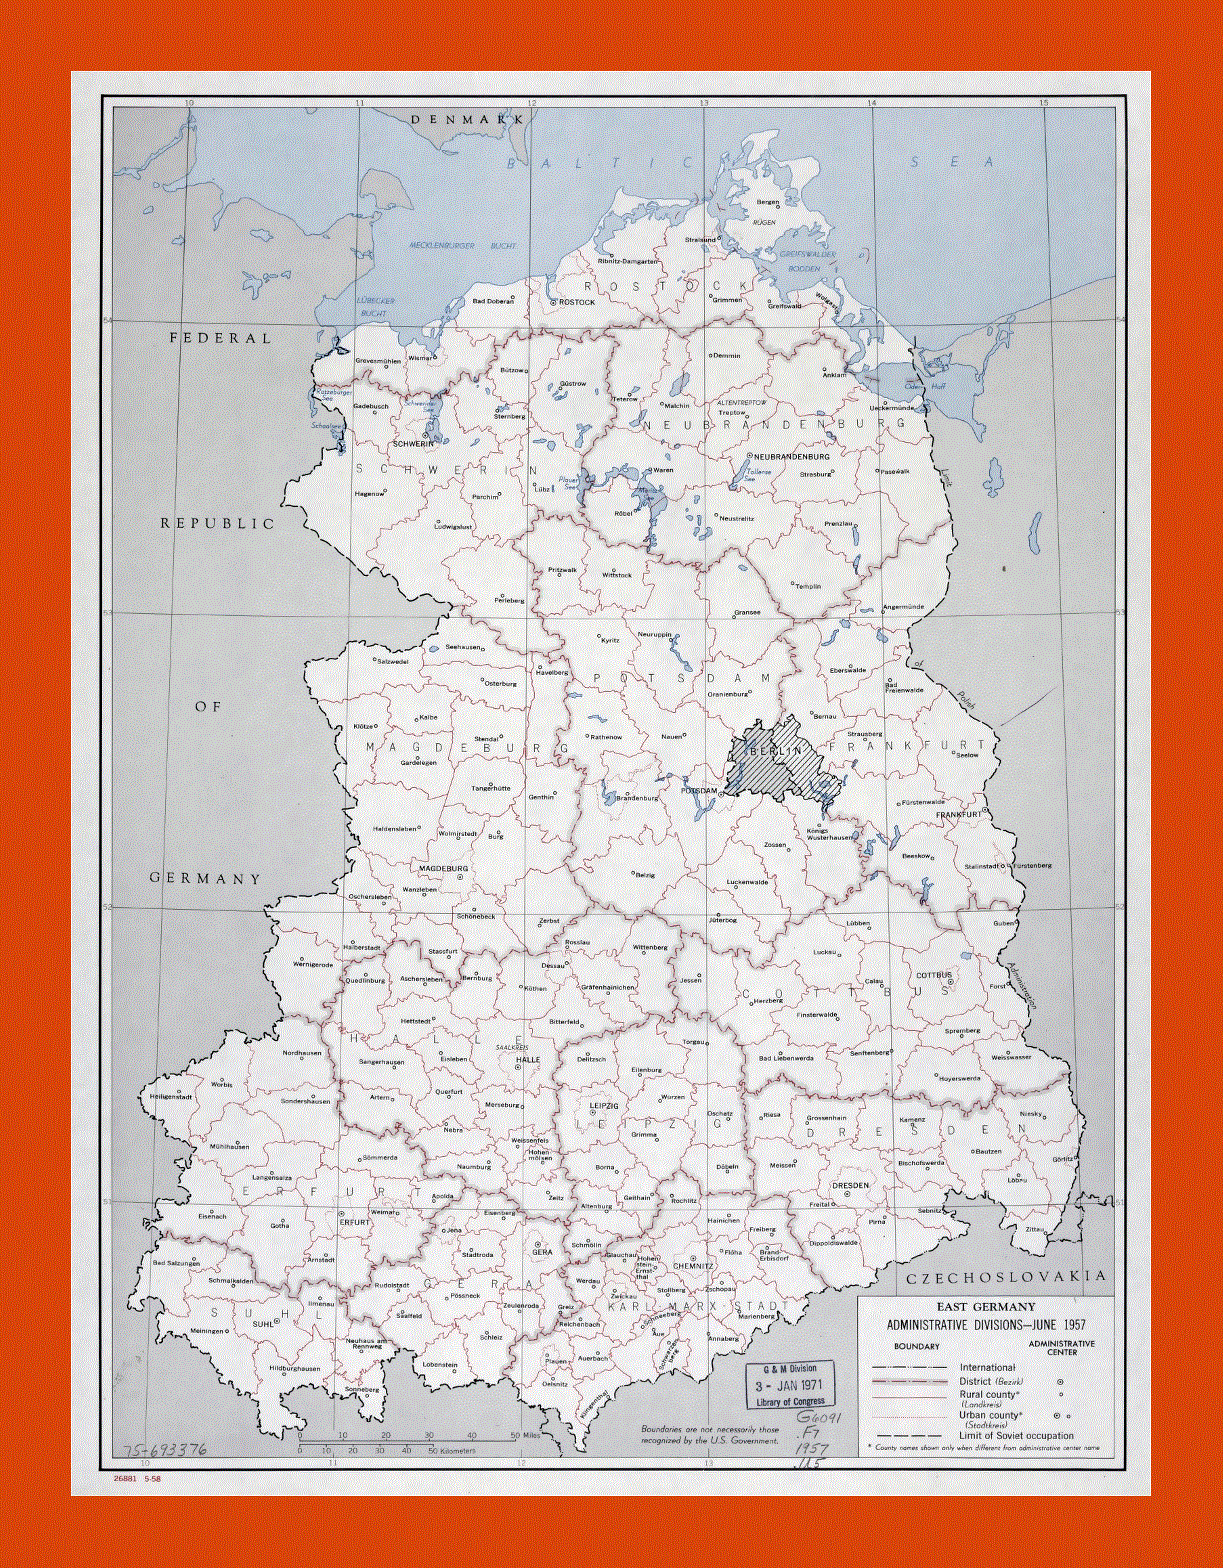 Administrative divisions map of East Germany - 1958